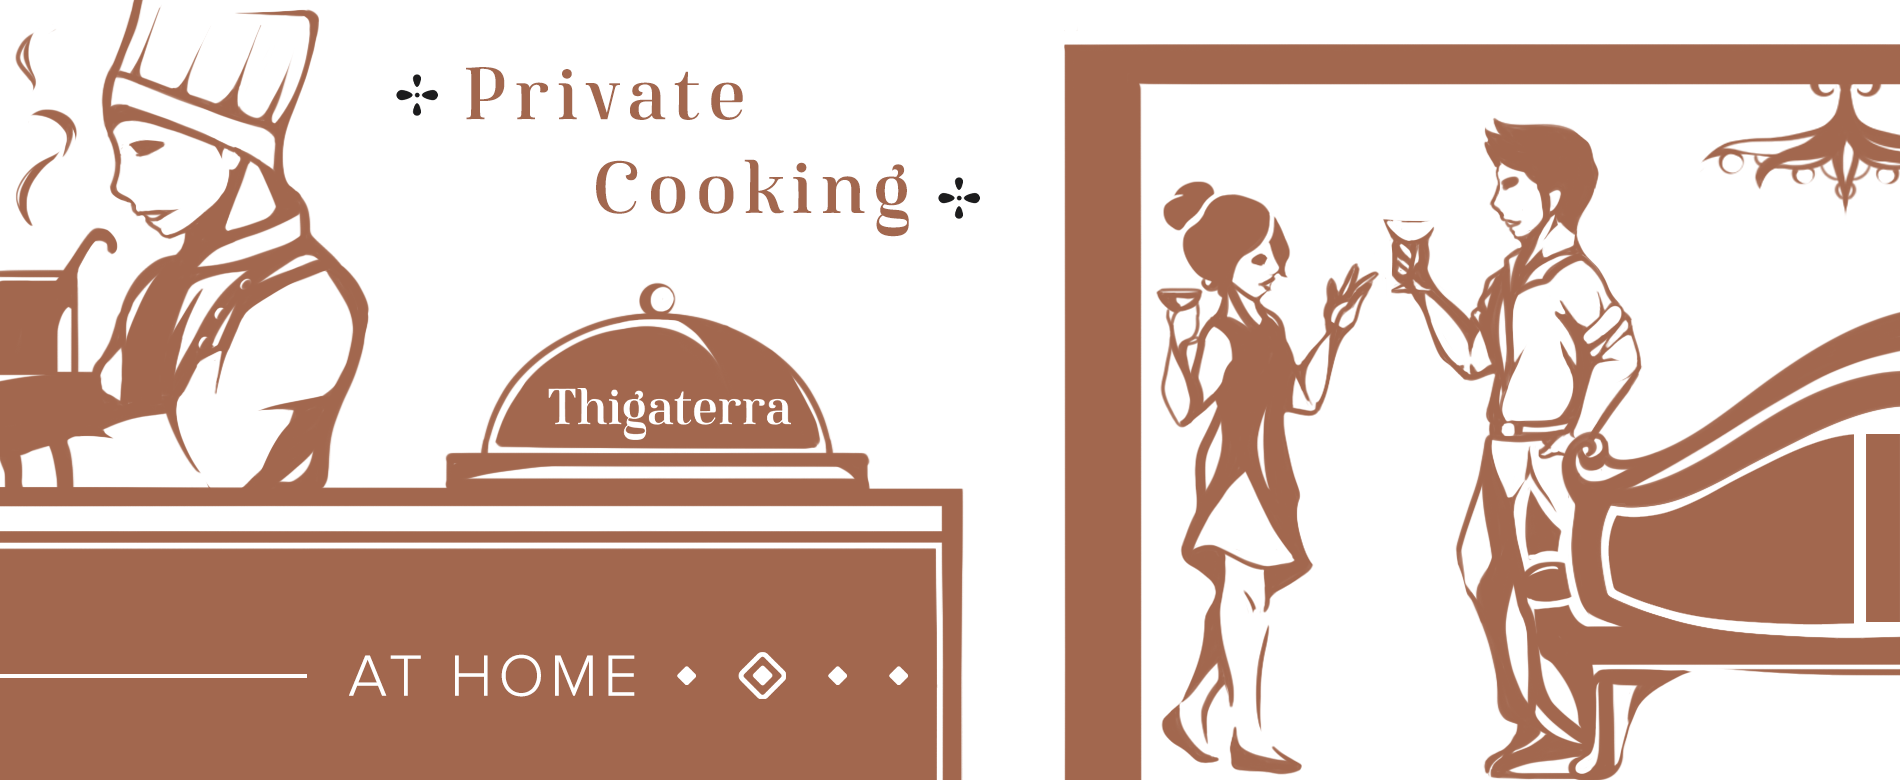 Private cooking